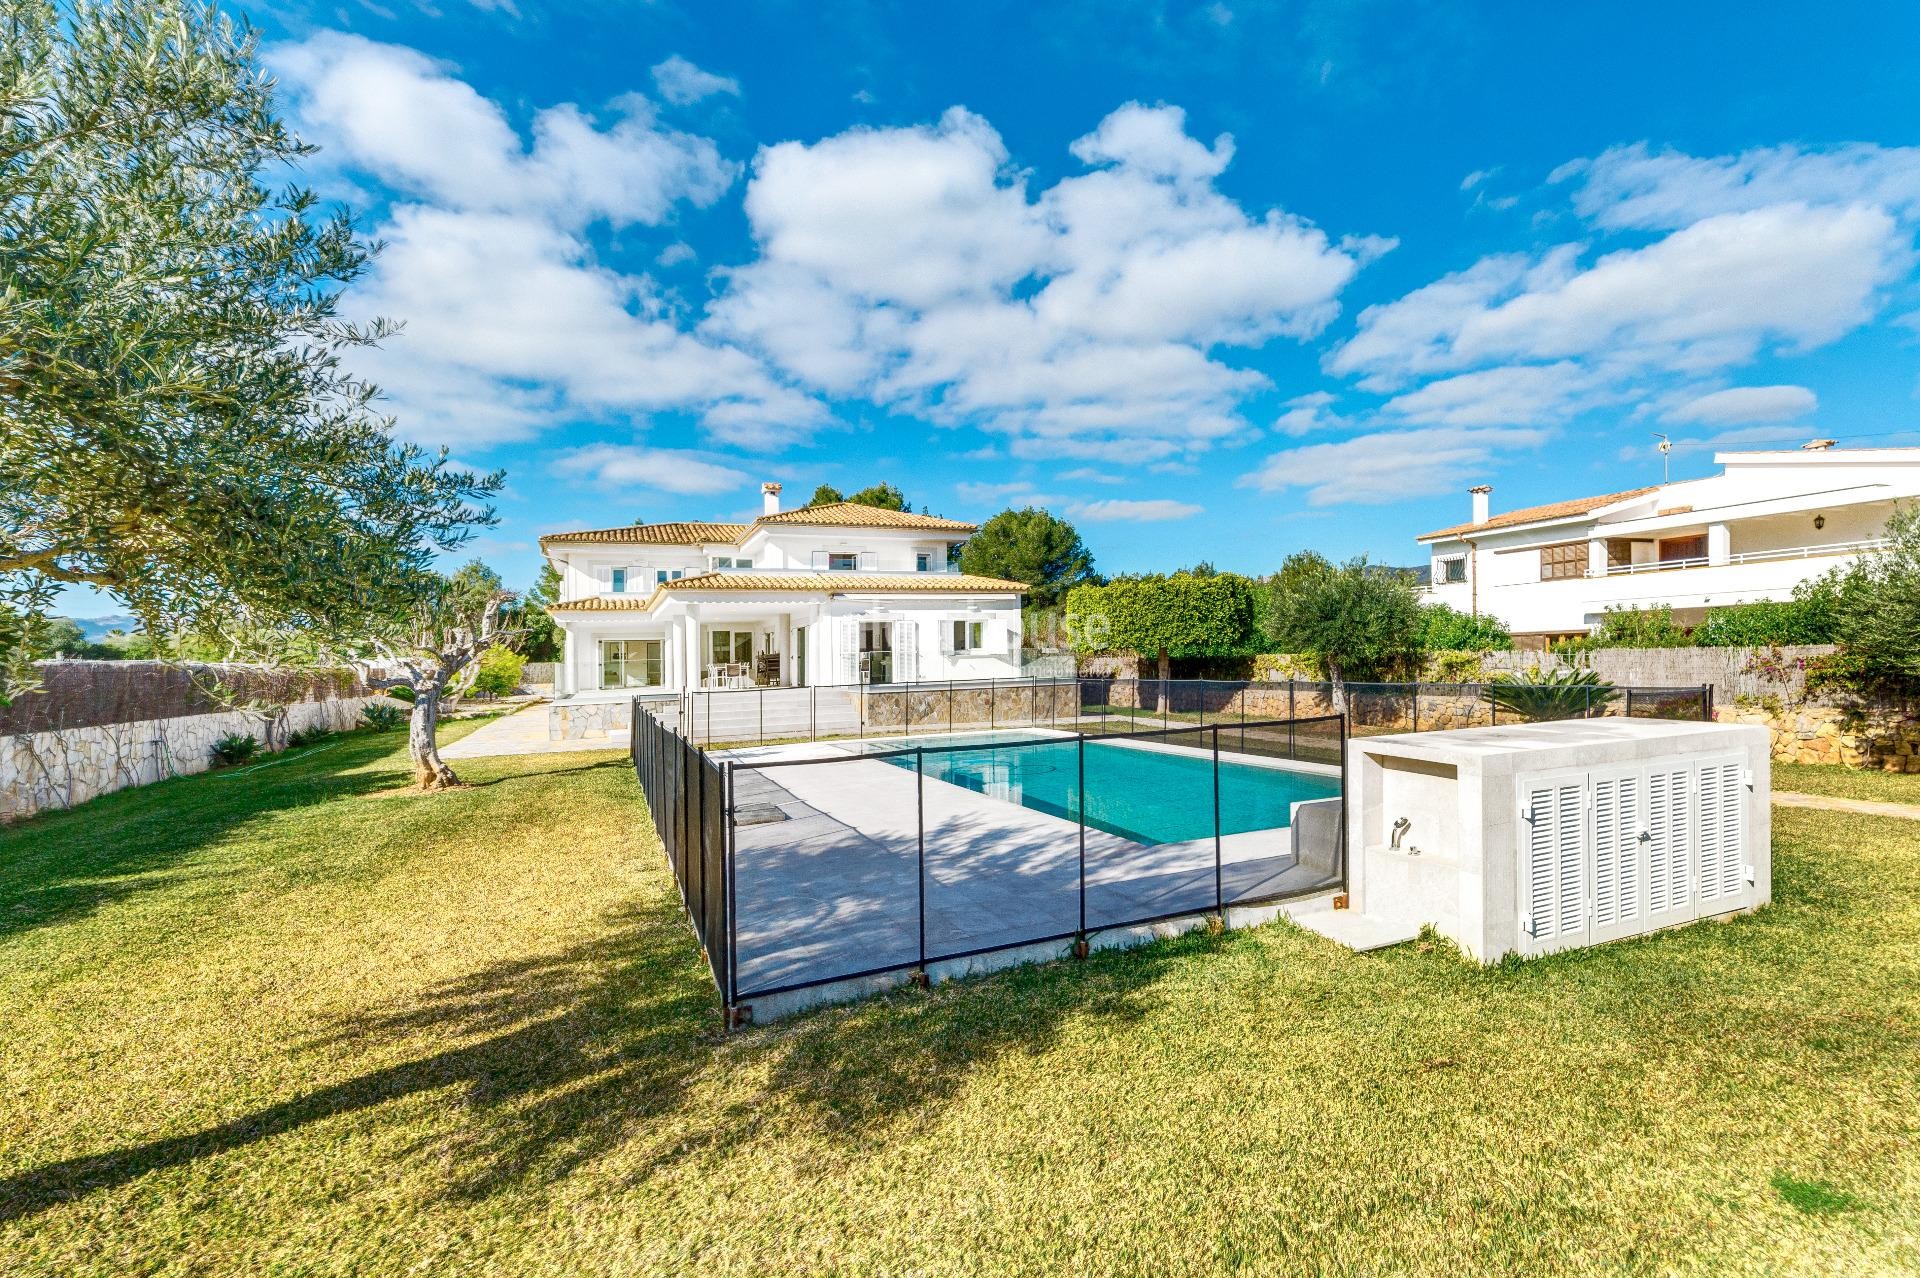 Mediterranean style villa just a few minutes from the sea in Puerto Pollensa